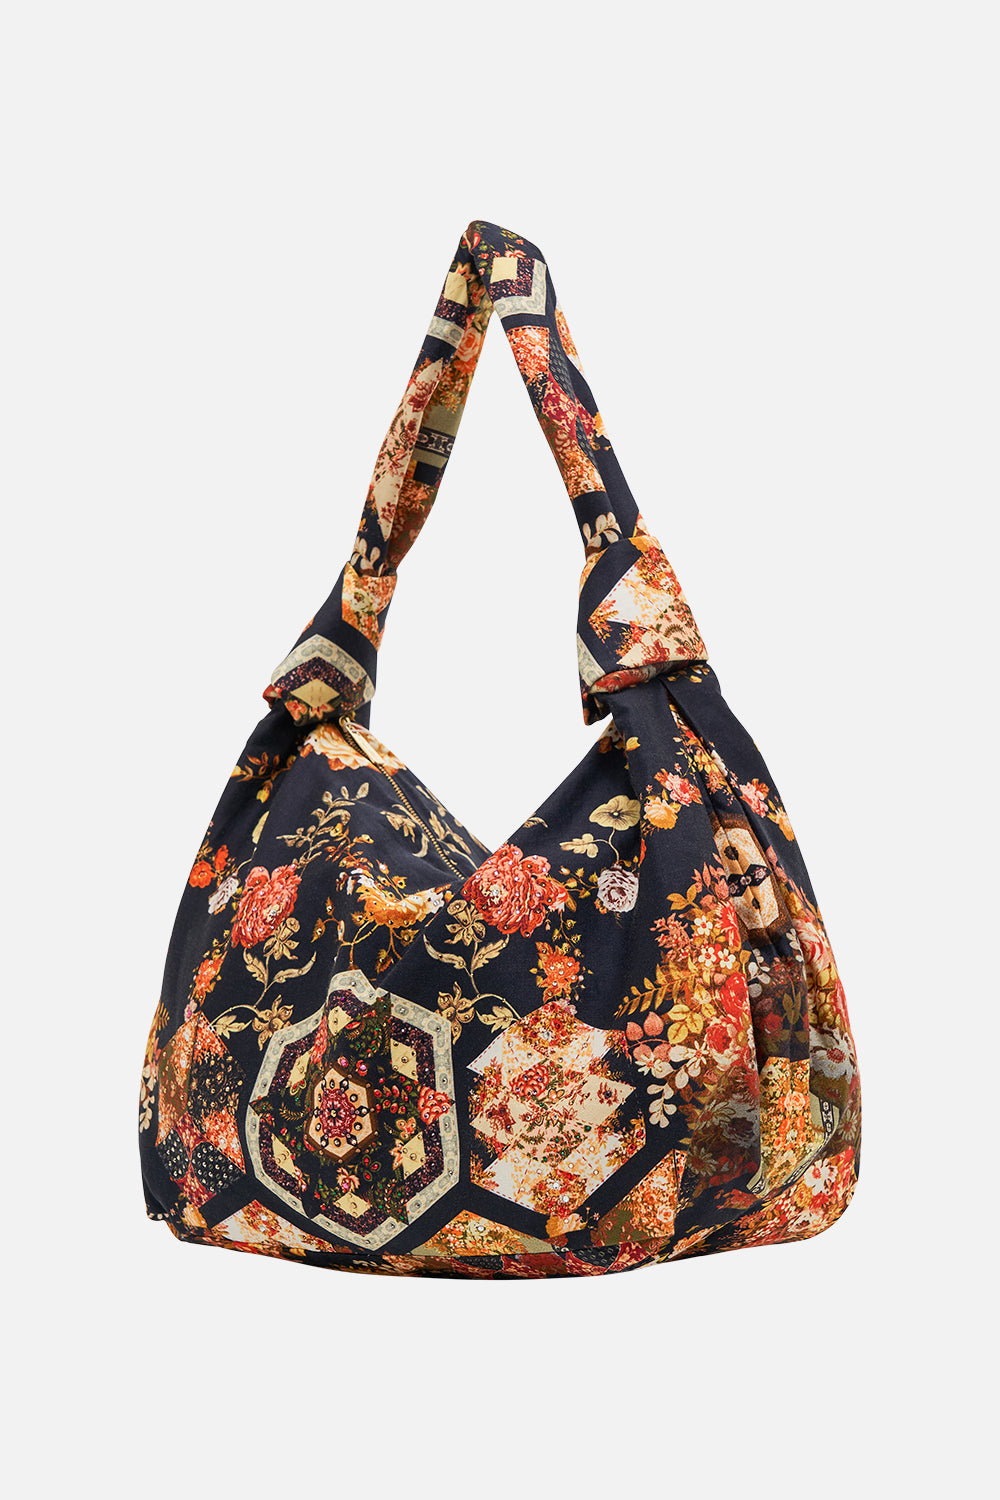 CAMILLA floral slouch shoulder bag in Stitched in Time